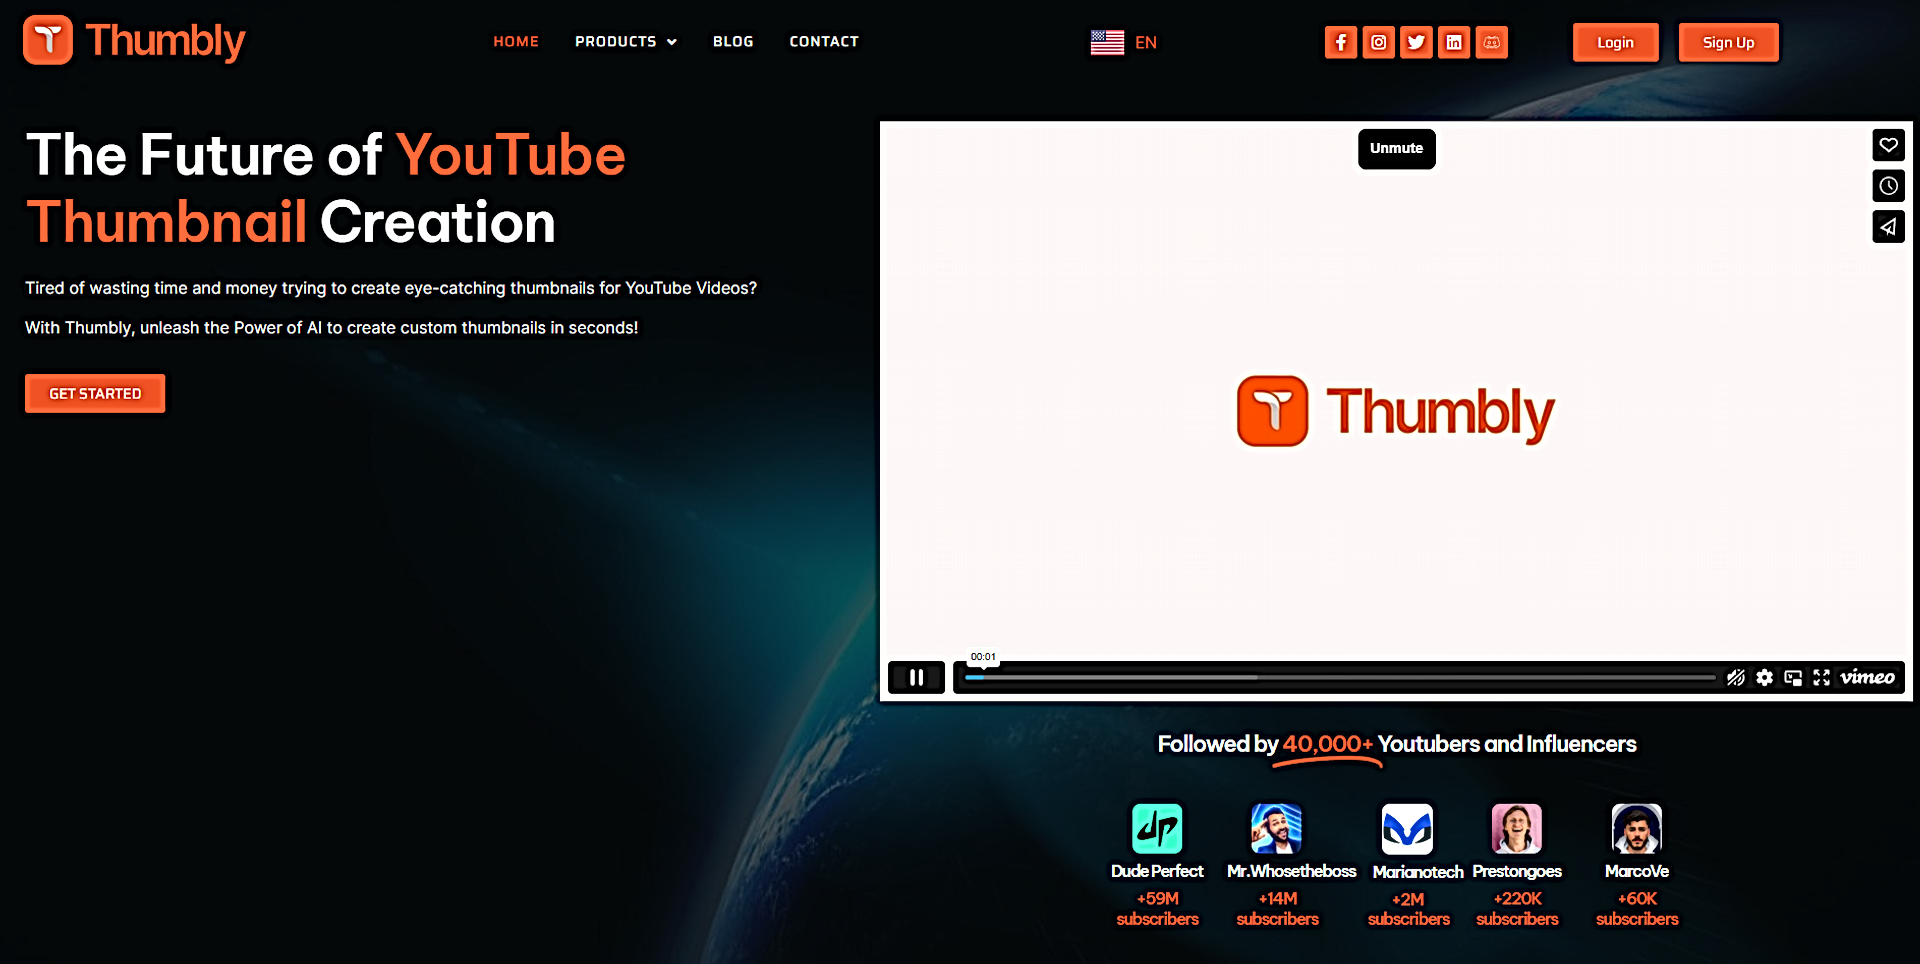 Thumbly featured